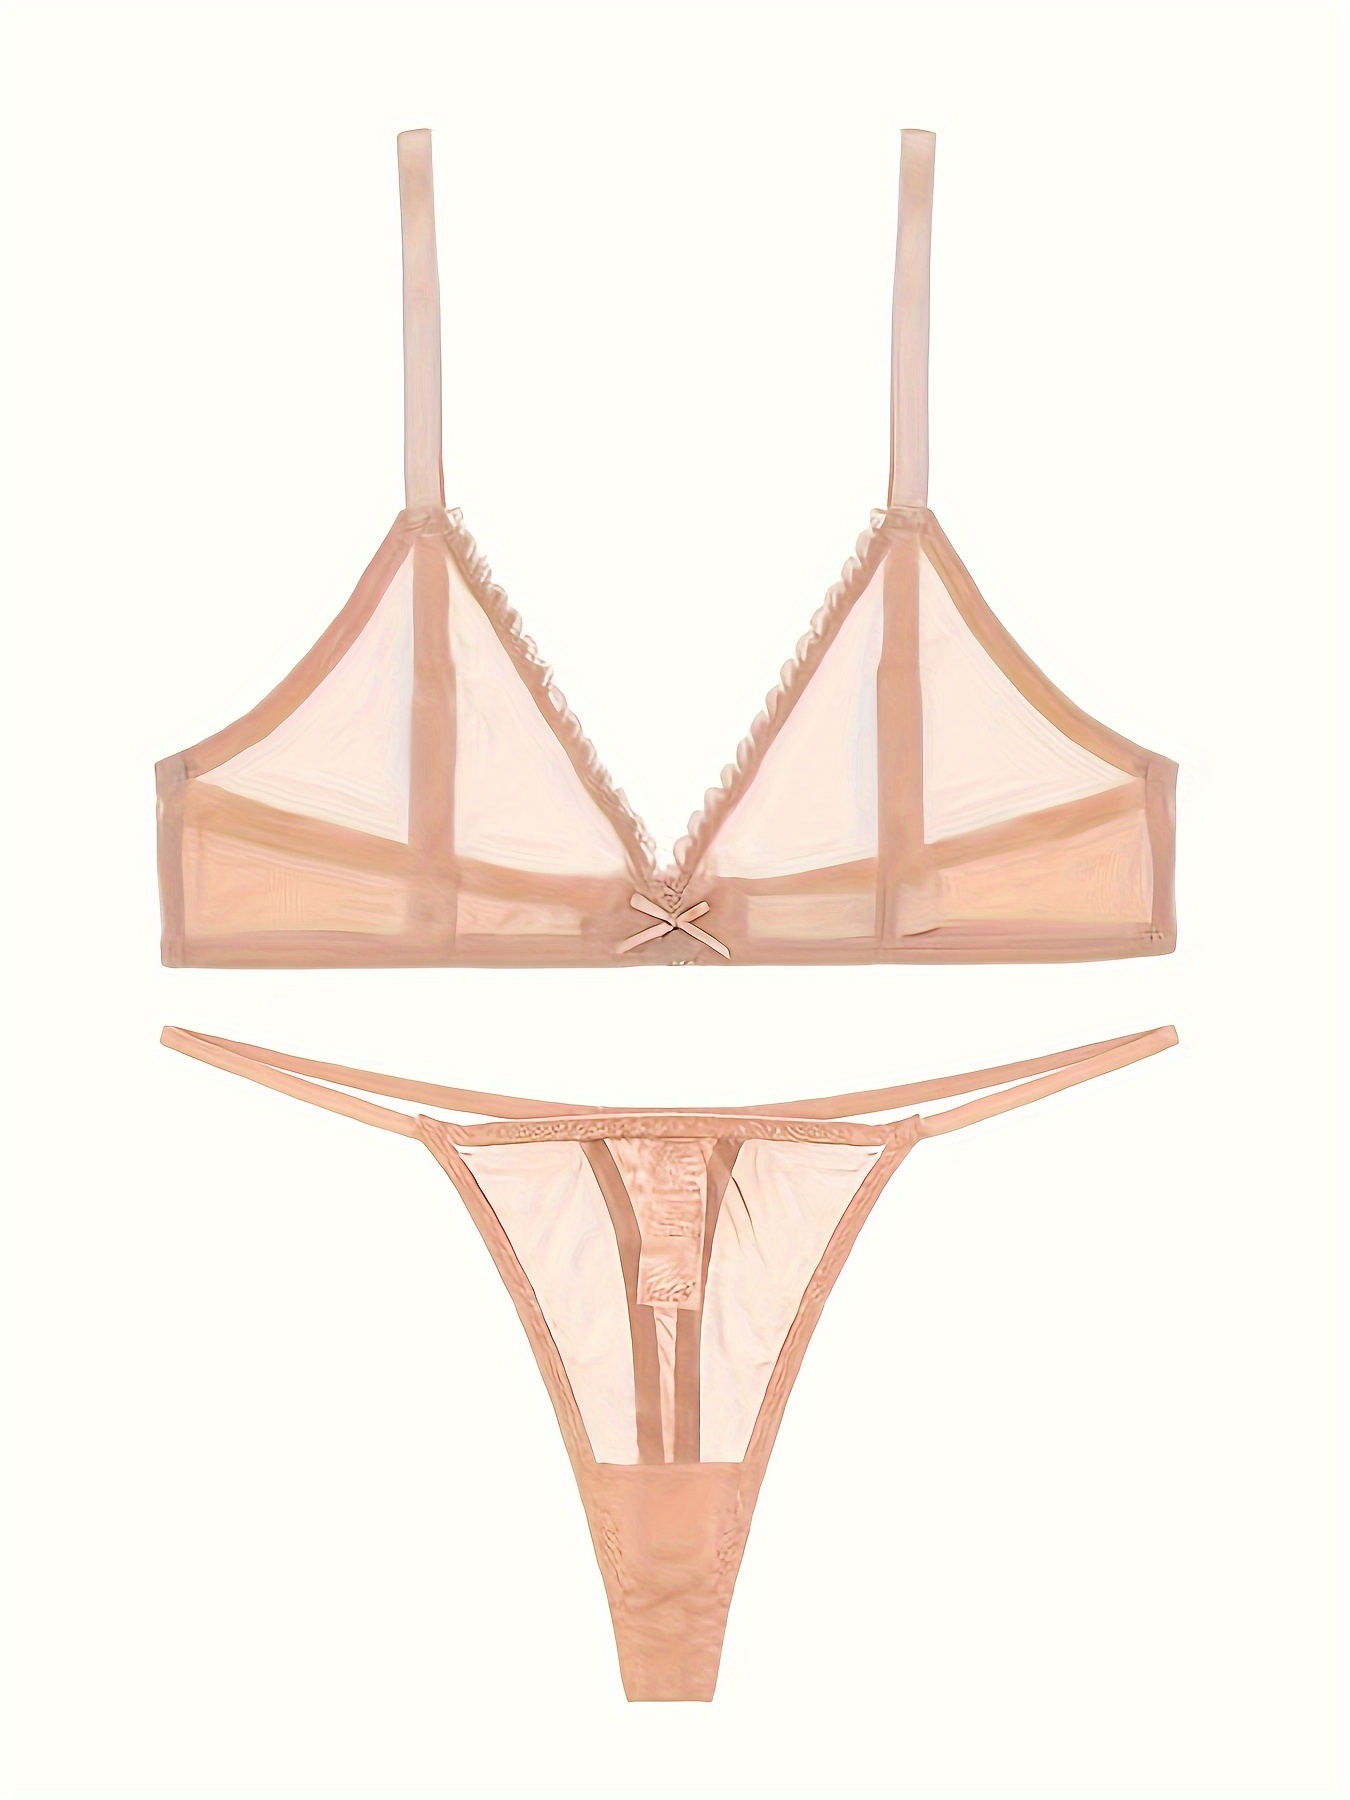 Intimates Soft Mesh Thong in Beige